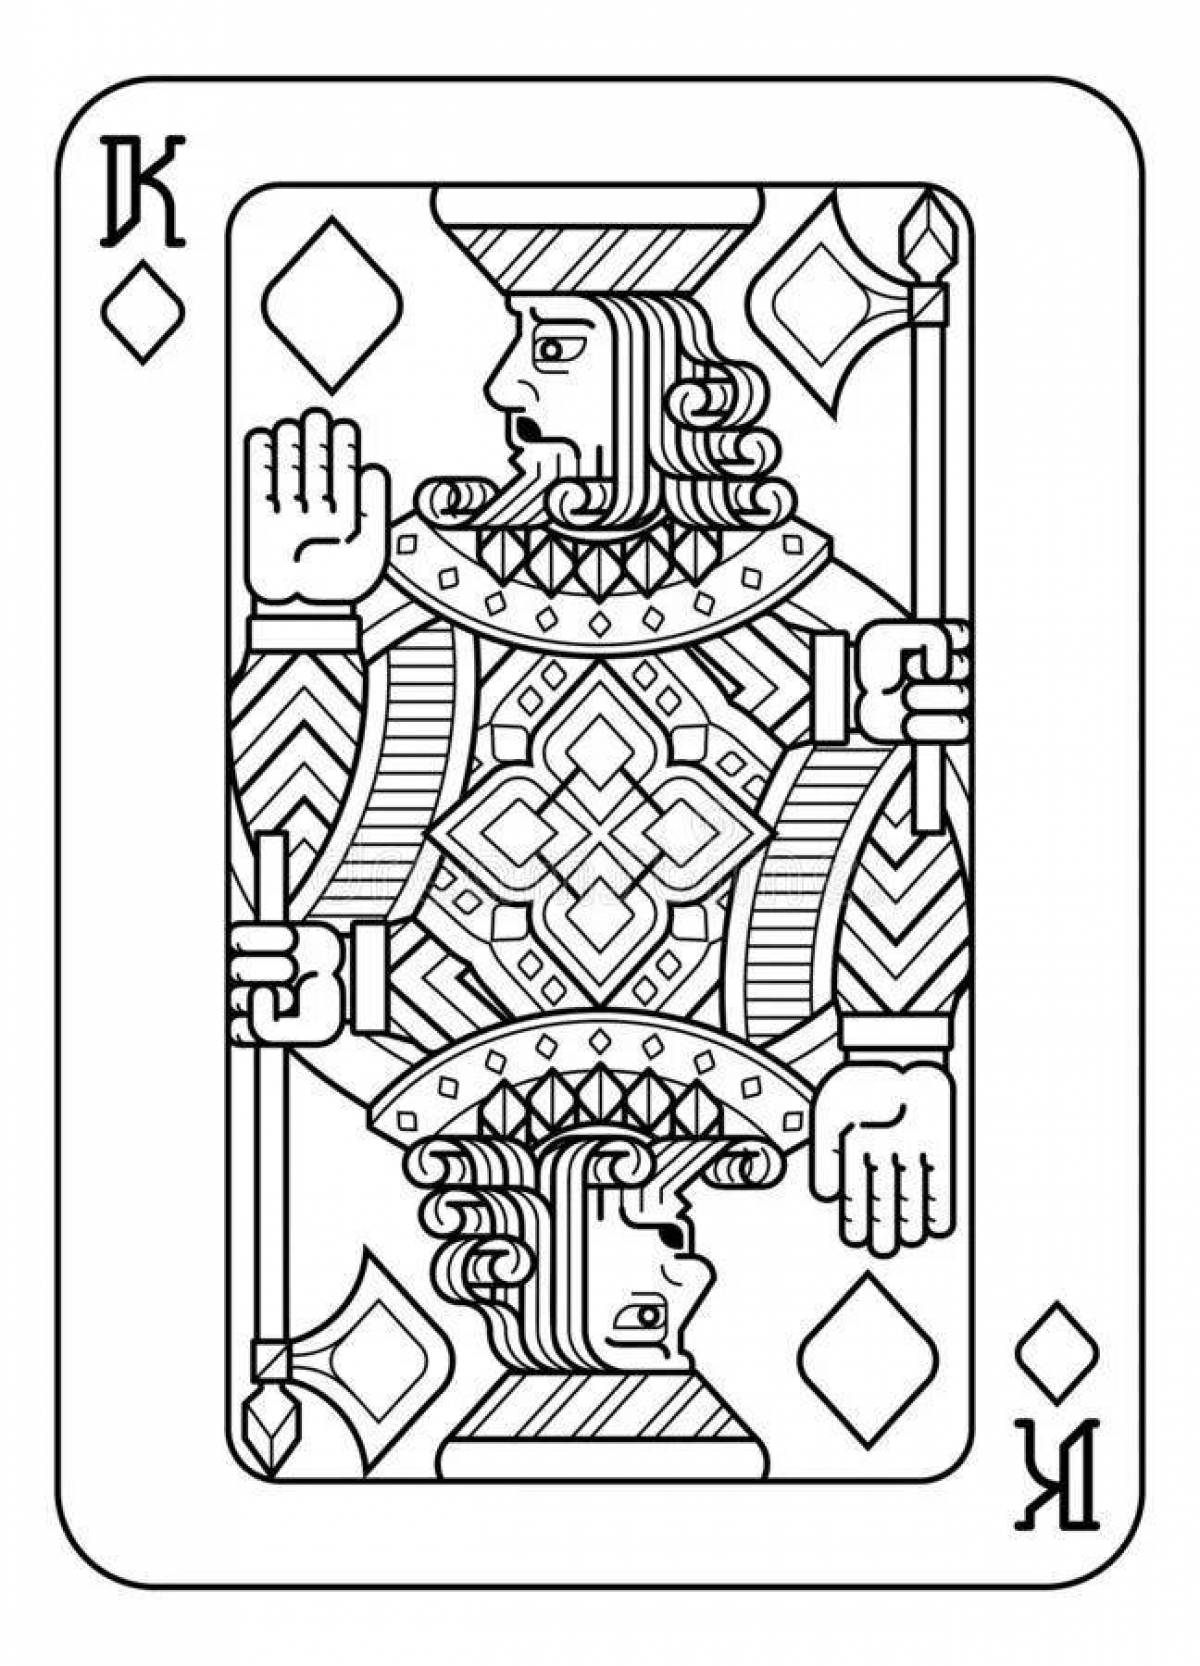 Playing cards #22